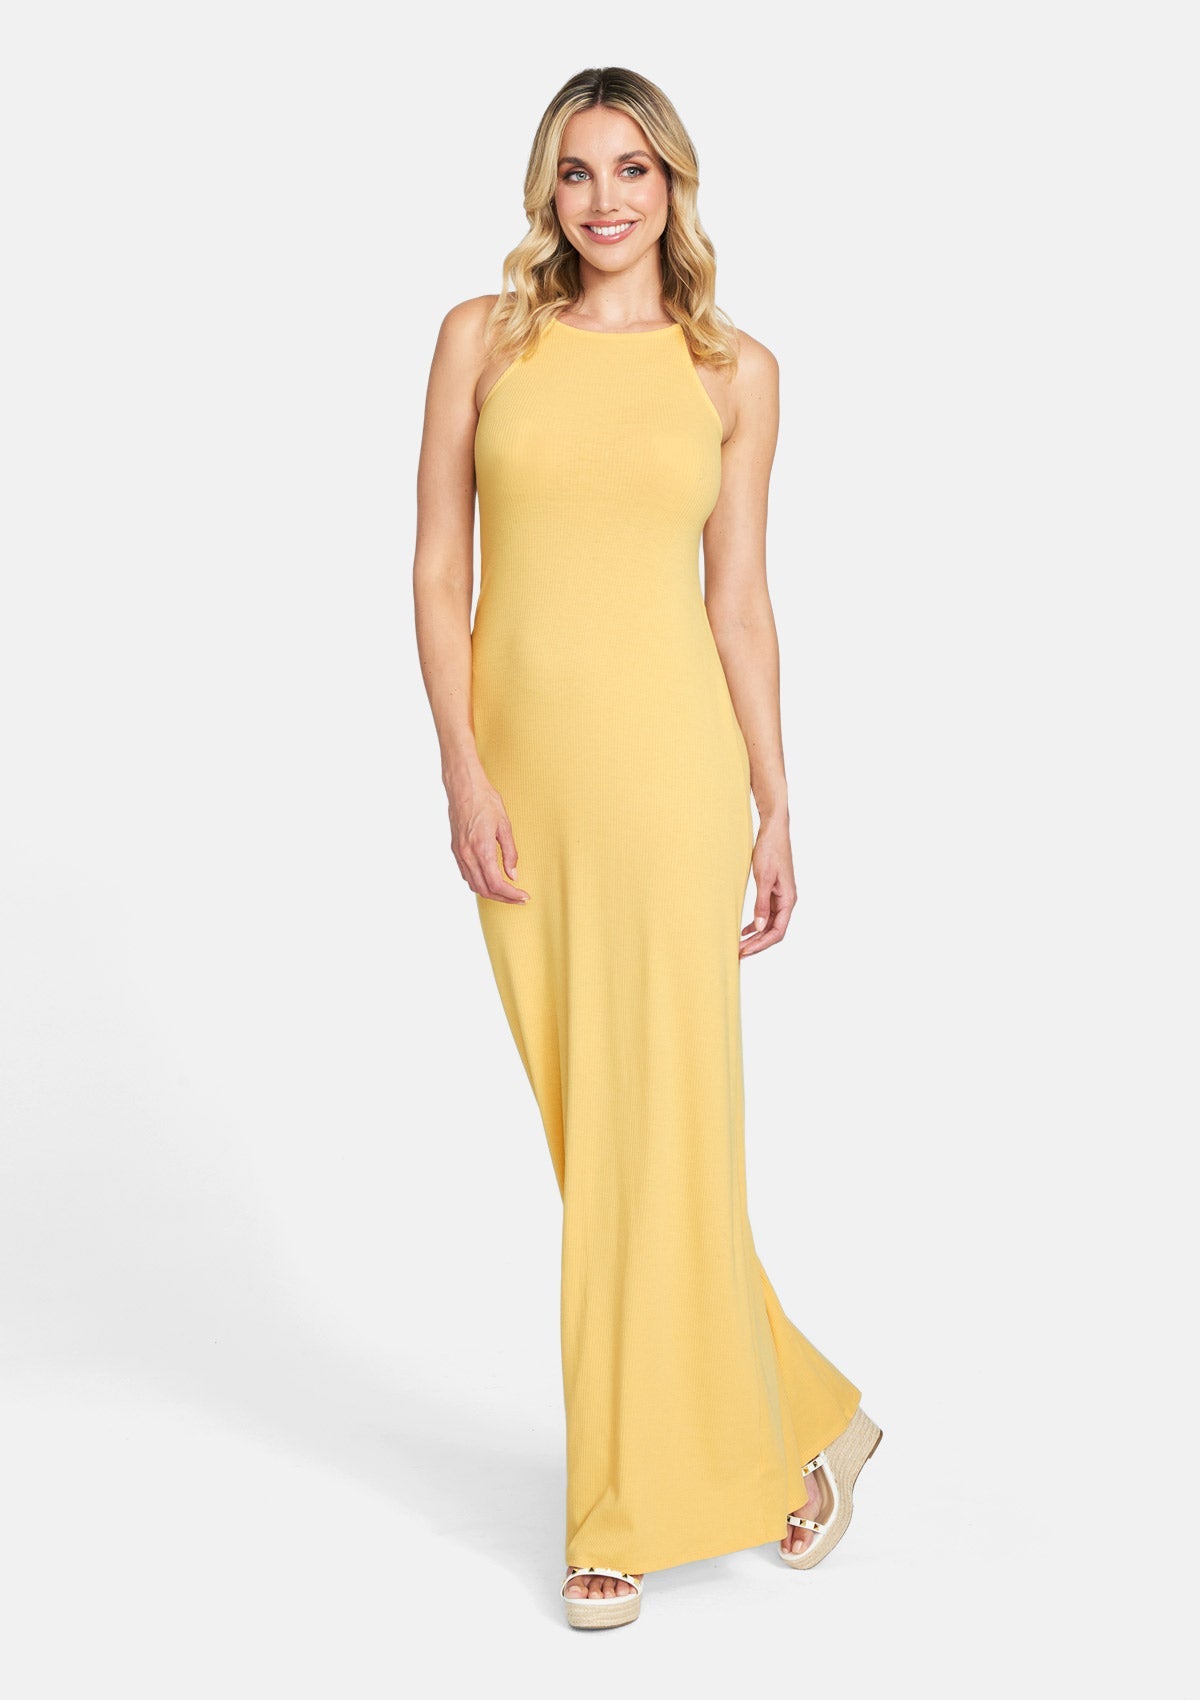 Alloy Apparel Tall Alden Maxi Dress for Women in Yellow Size S | Rayon